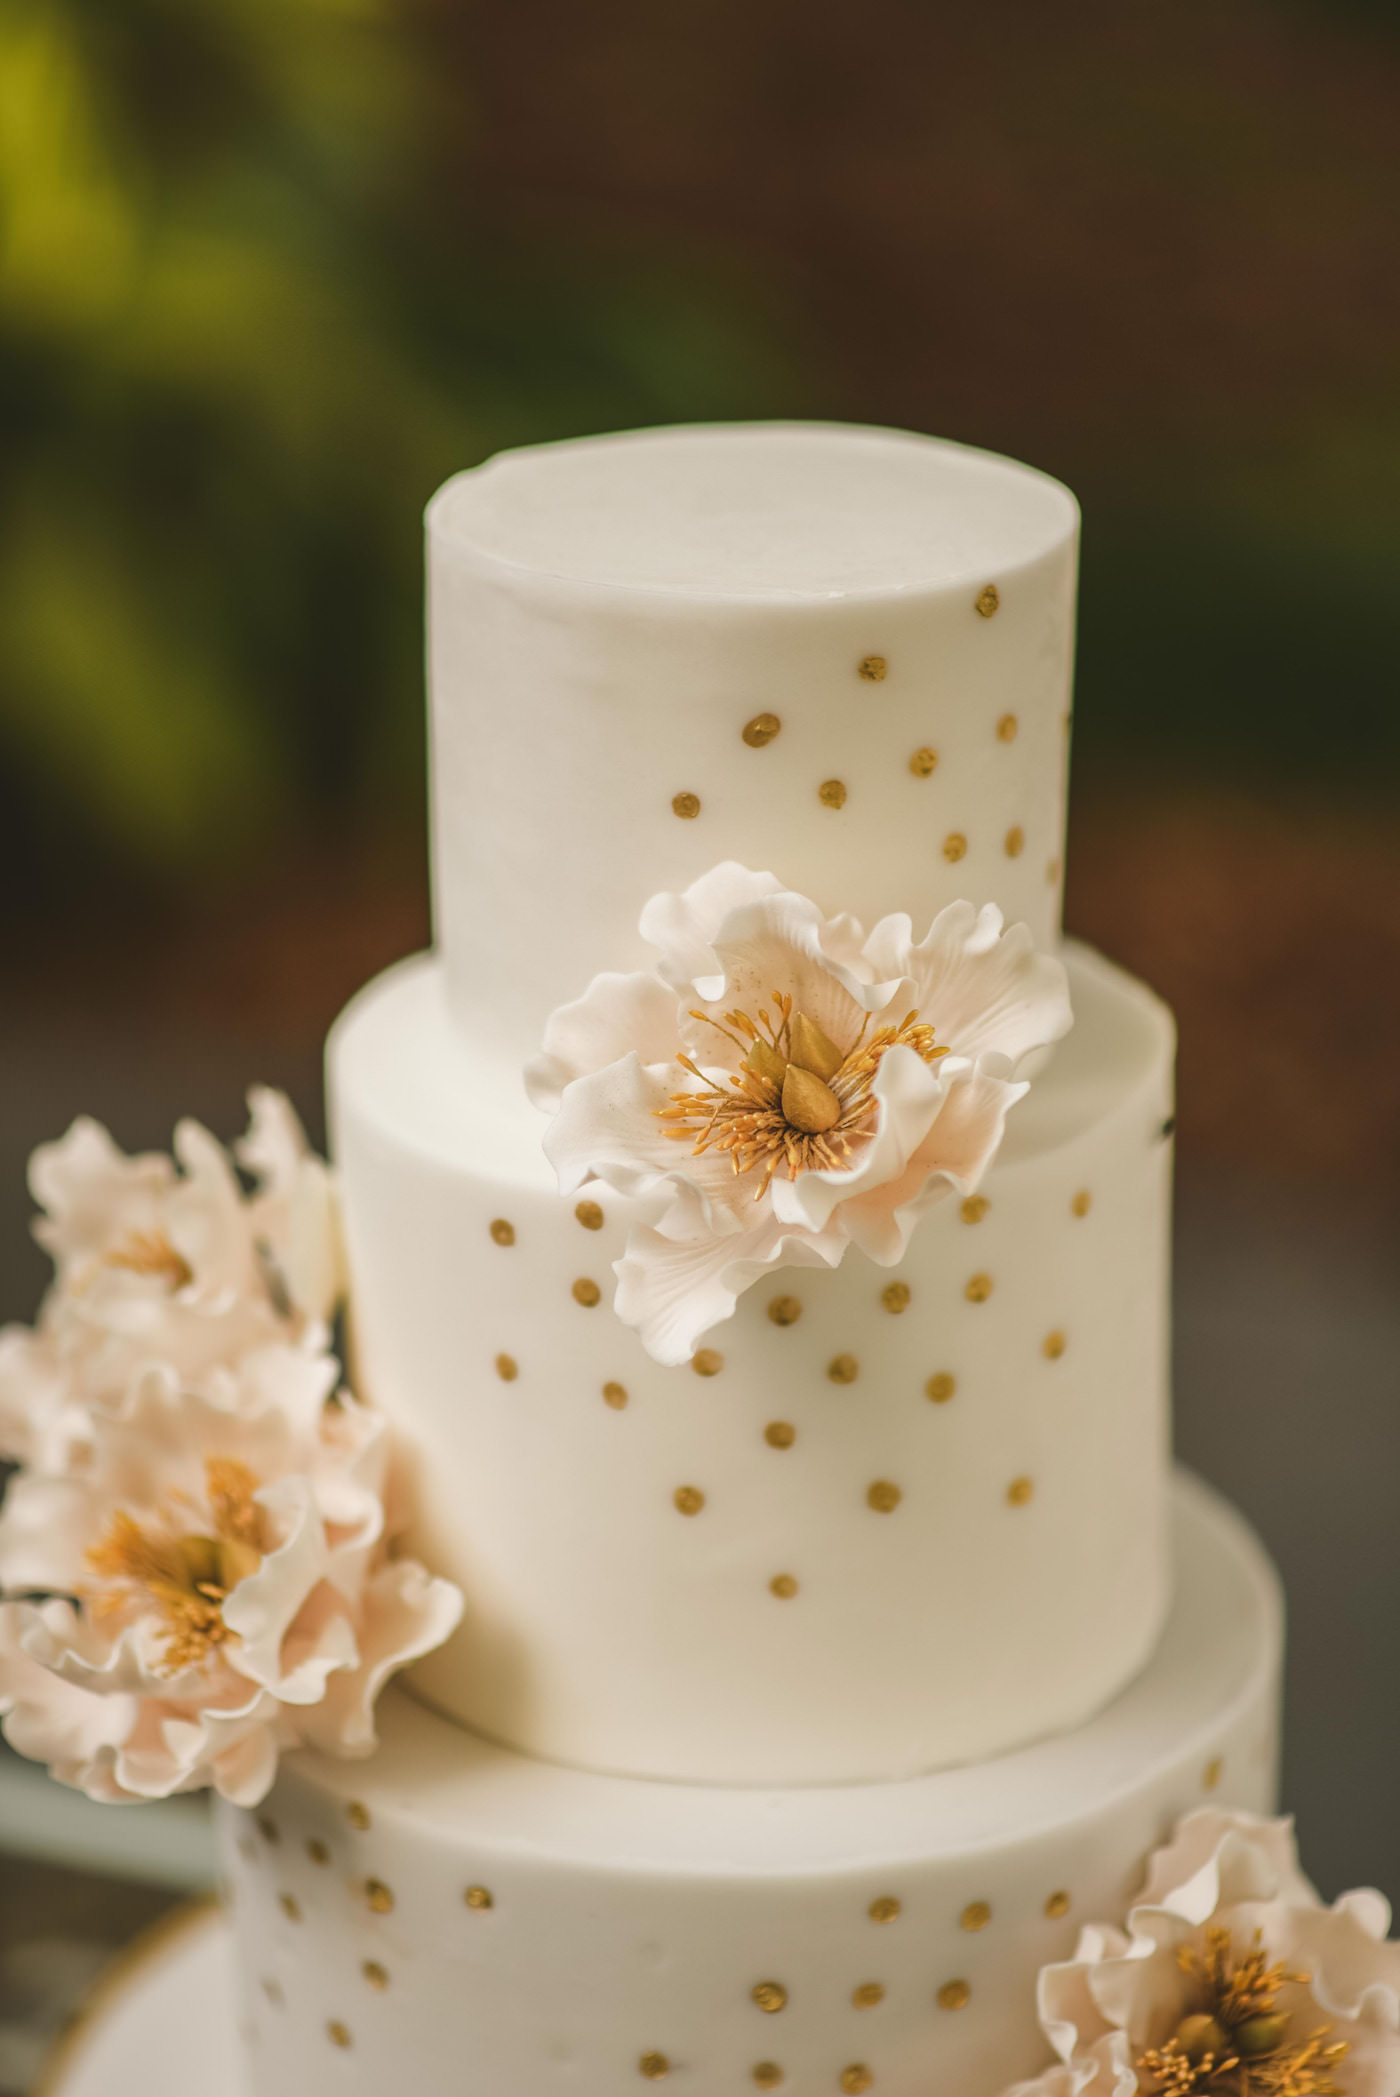 Tampa Bay Cake Company Three Tier Wedding Cake with Rose Gold Polka Dots and Blush Pink Sugar Flower Peonies